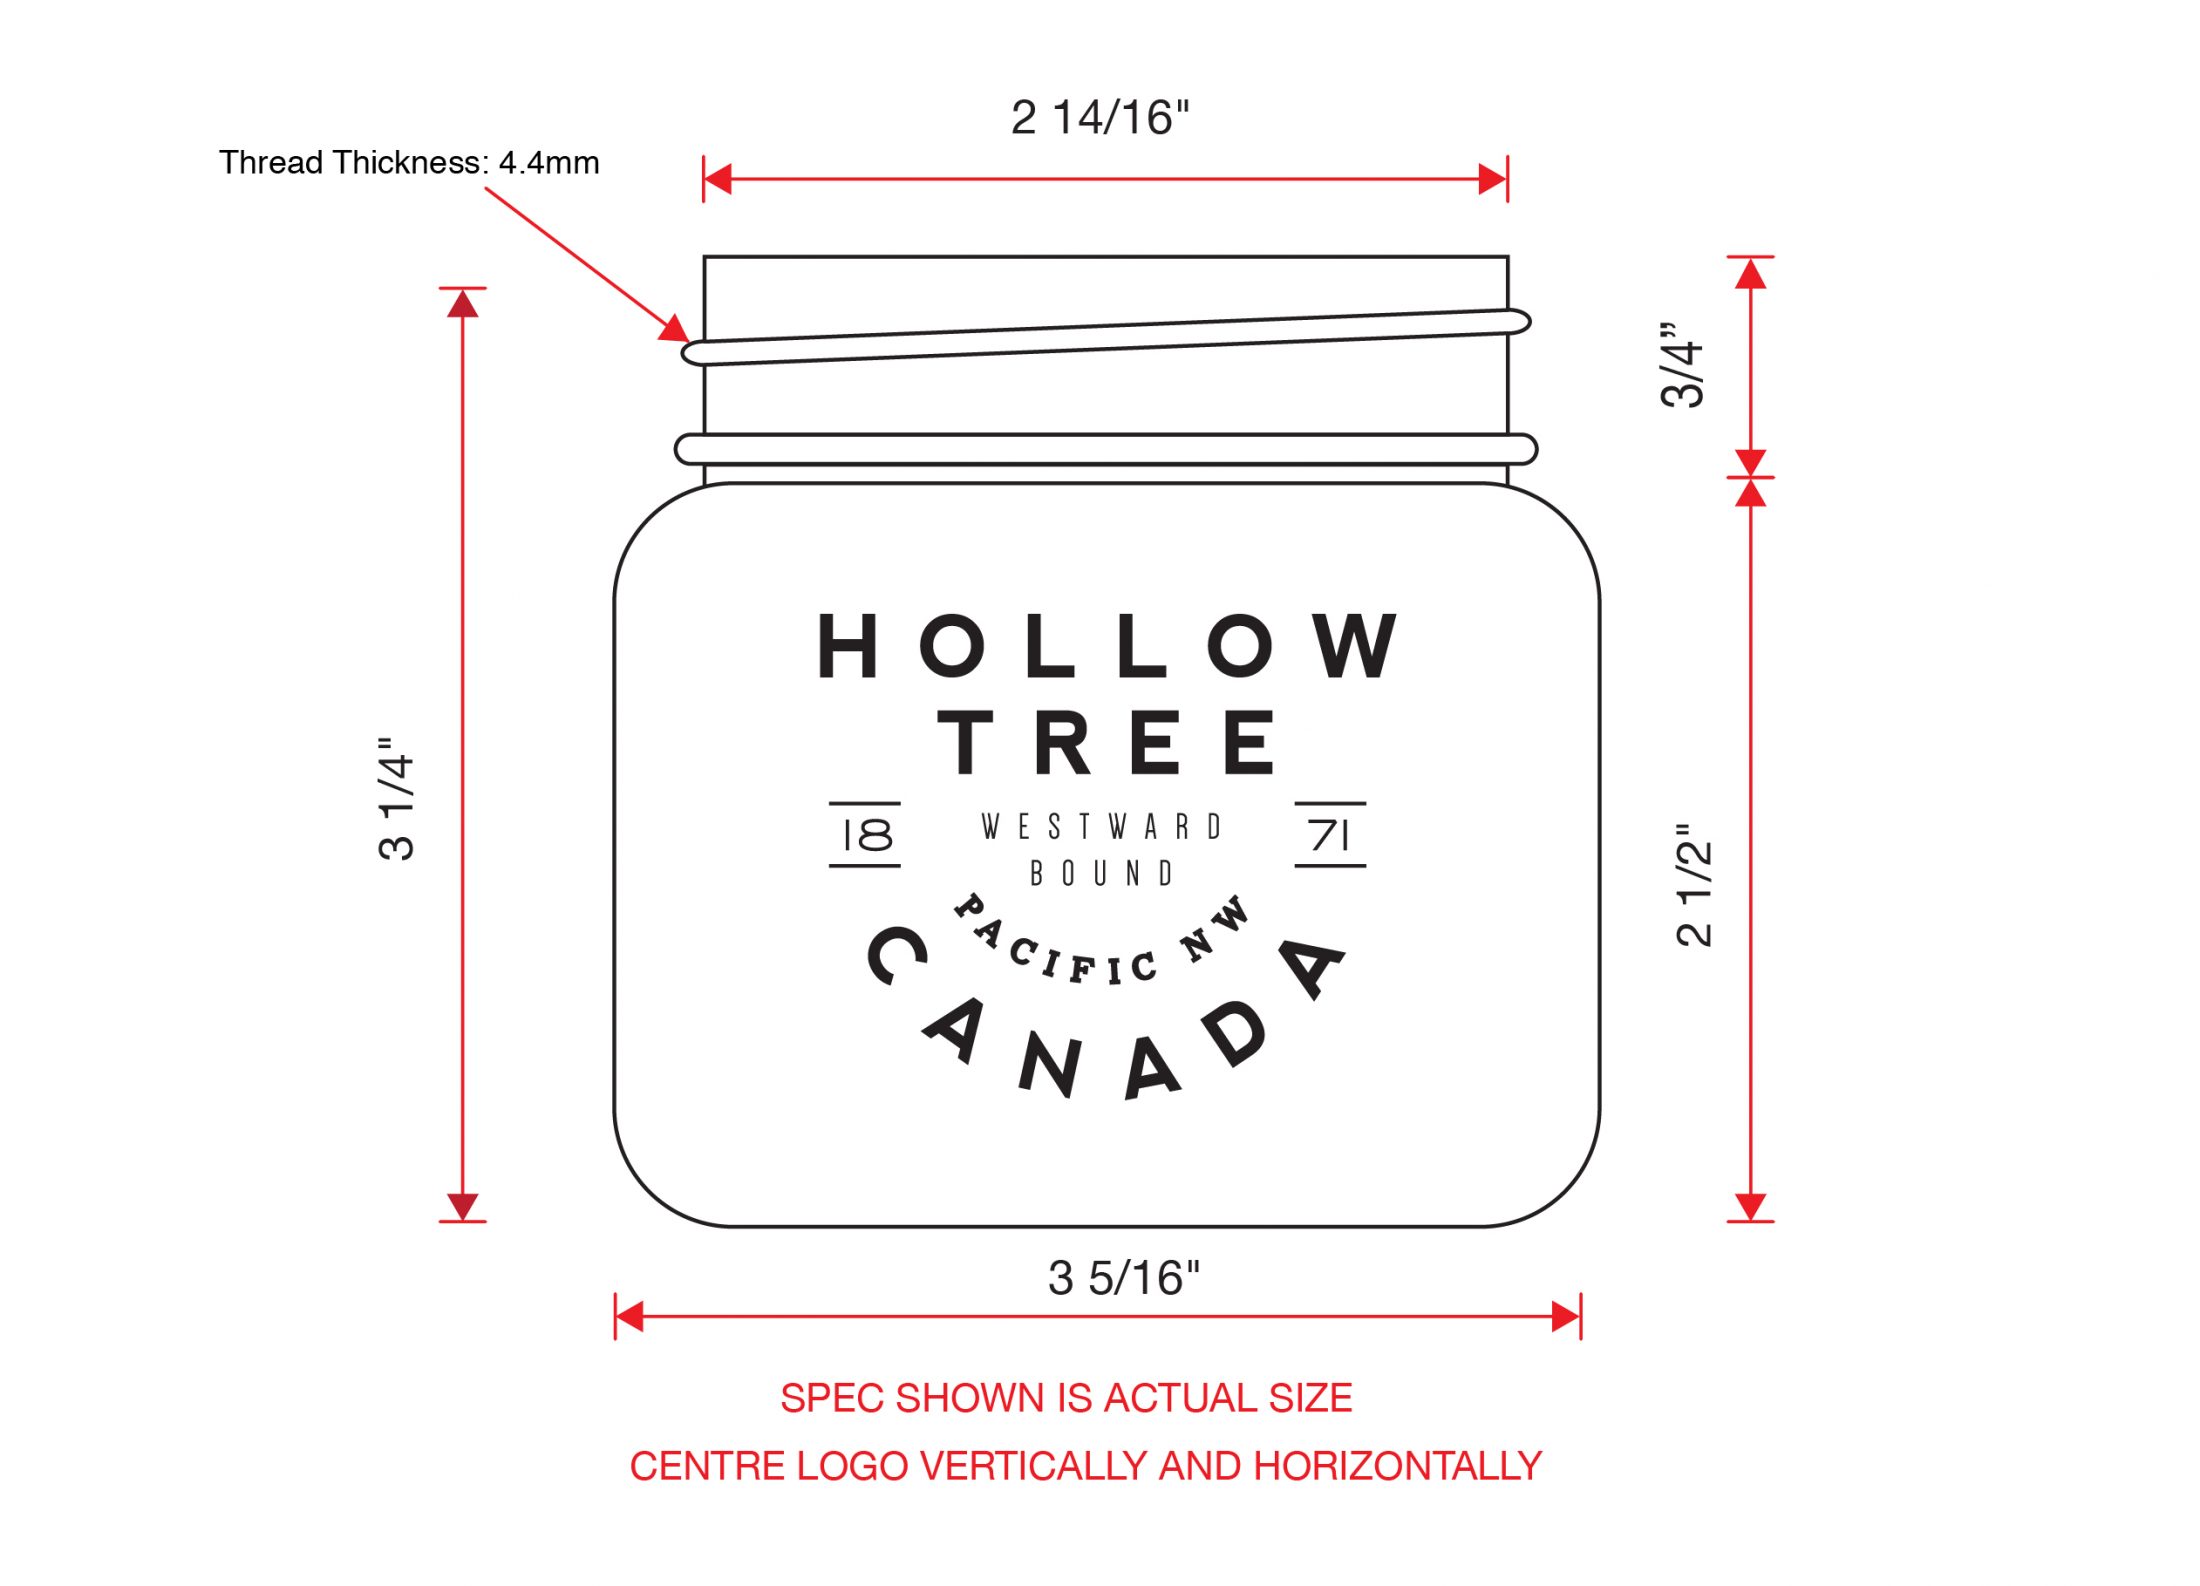 Technical drawing for Hollow Tree candle vessel. 